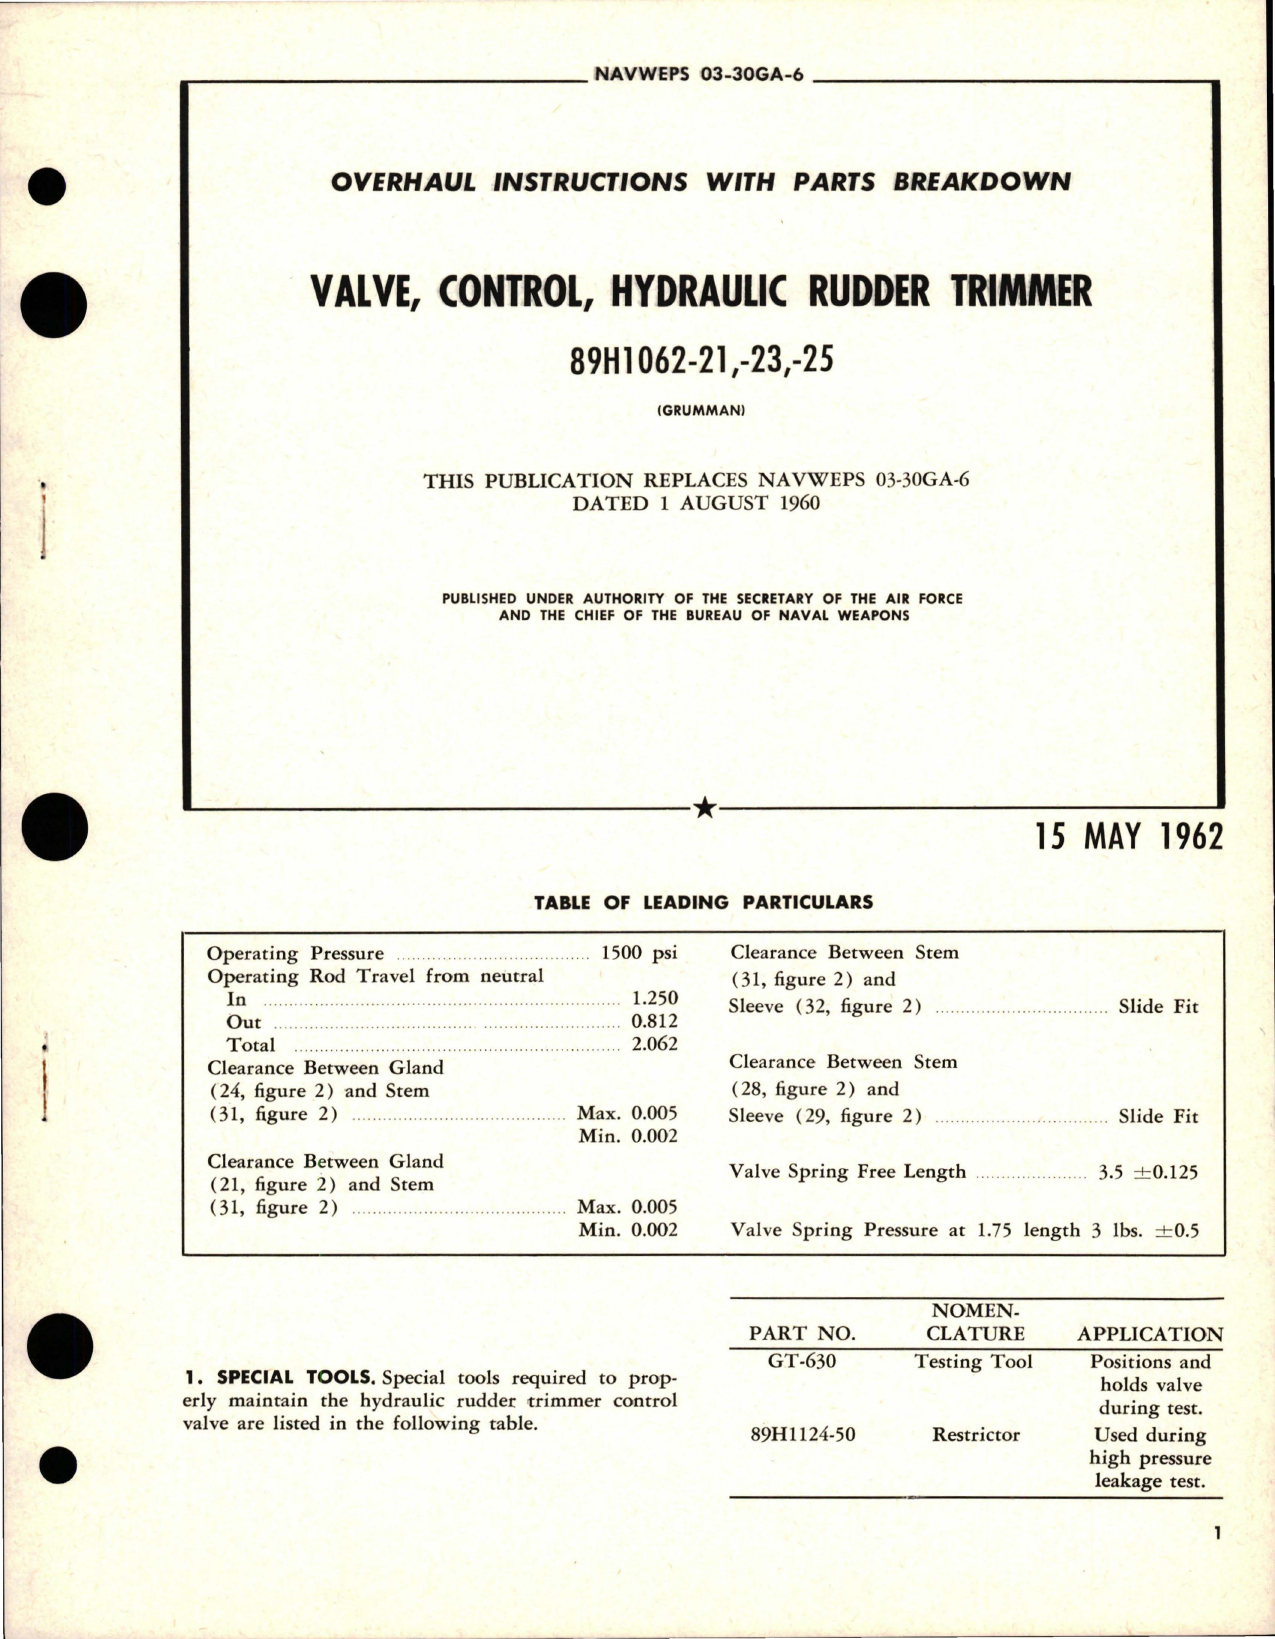 Sample page 1 from AirCorps Library document: Overhaul Instructions with Parts Breakdown for Hydraulic Rudder Trimmer Control Valve - 89H1062-21, 89H1062-23, and 89H1062-25